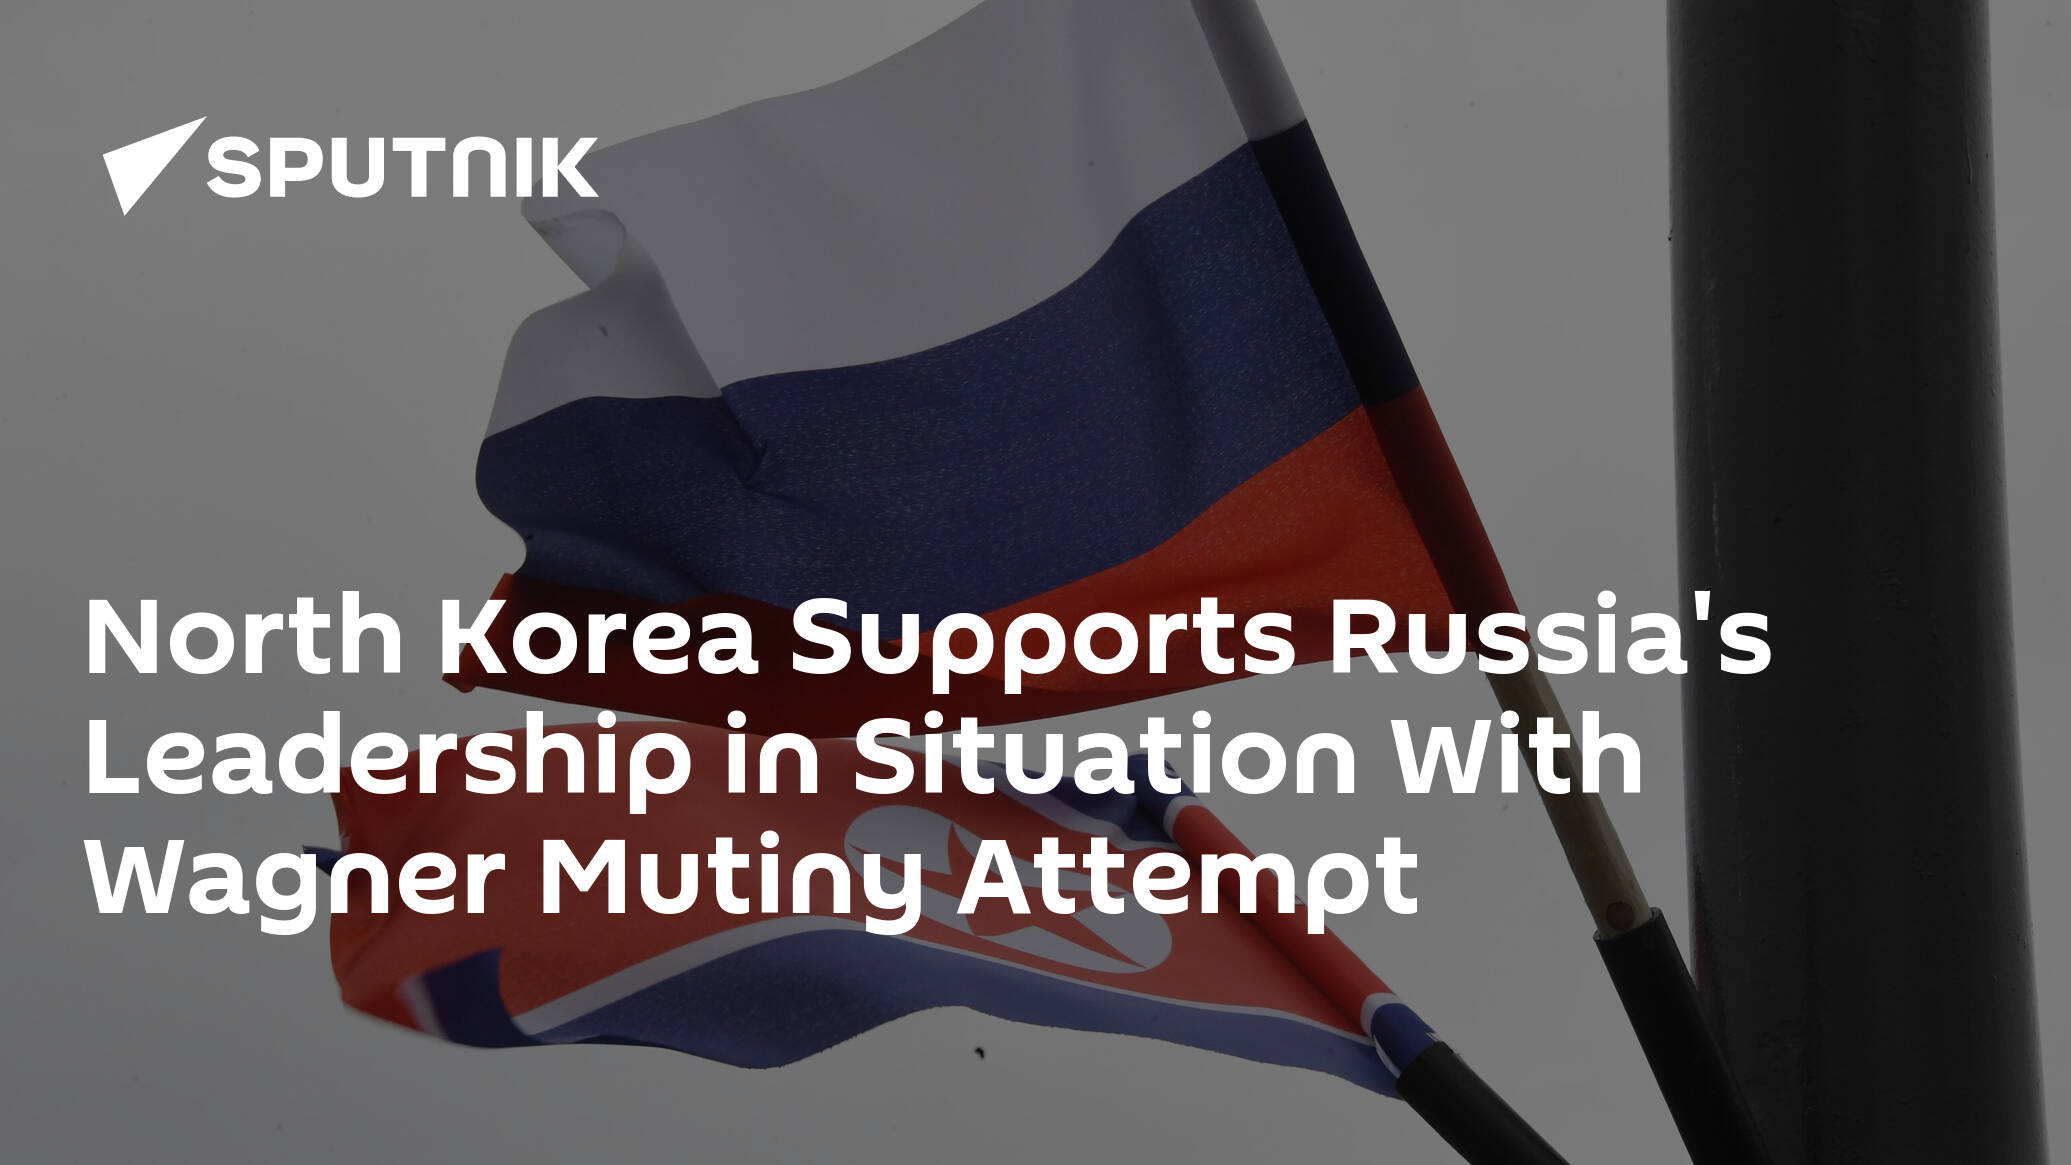 North Korea Supports Russia's Leadership in Situation With Wagner Mutiny Attempt